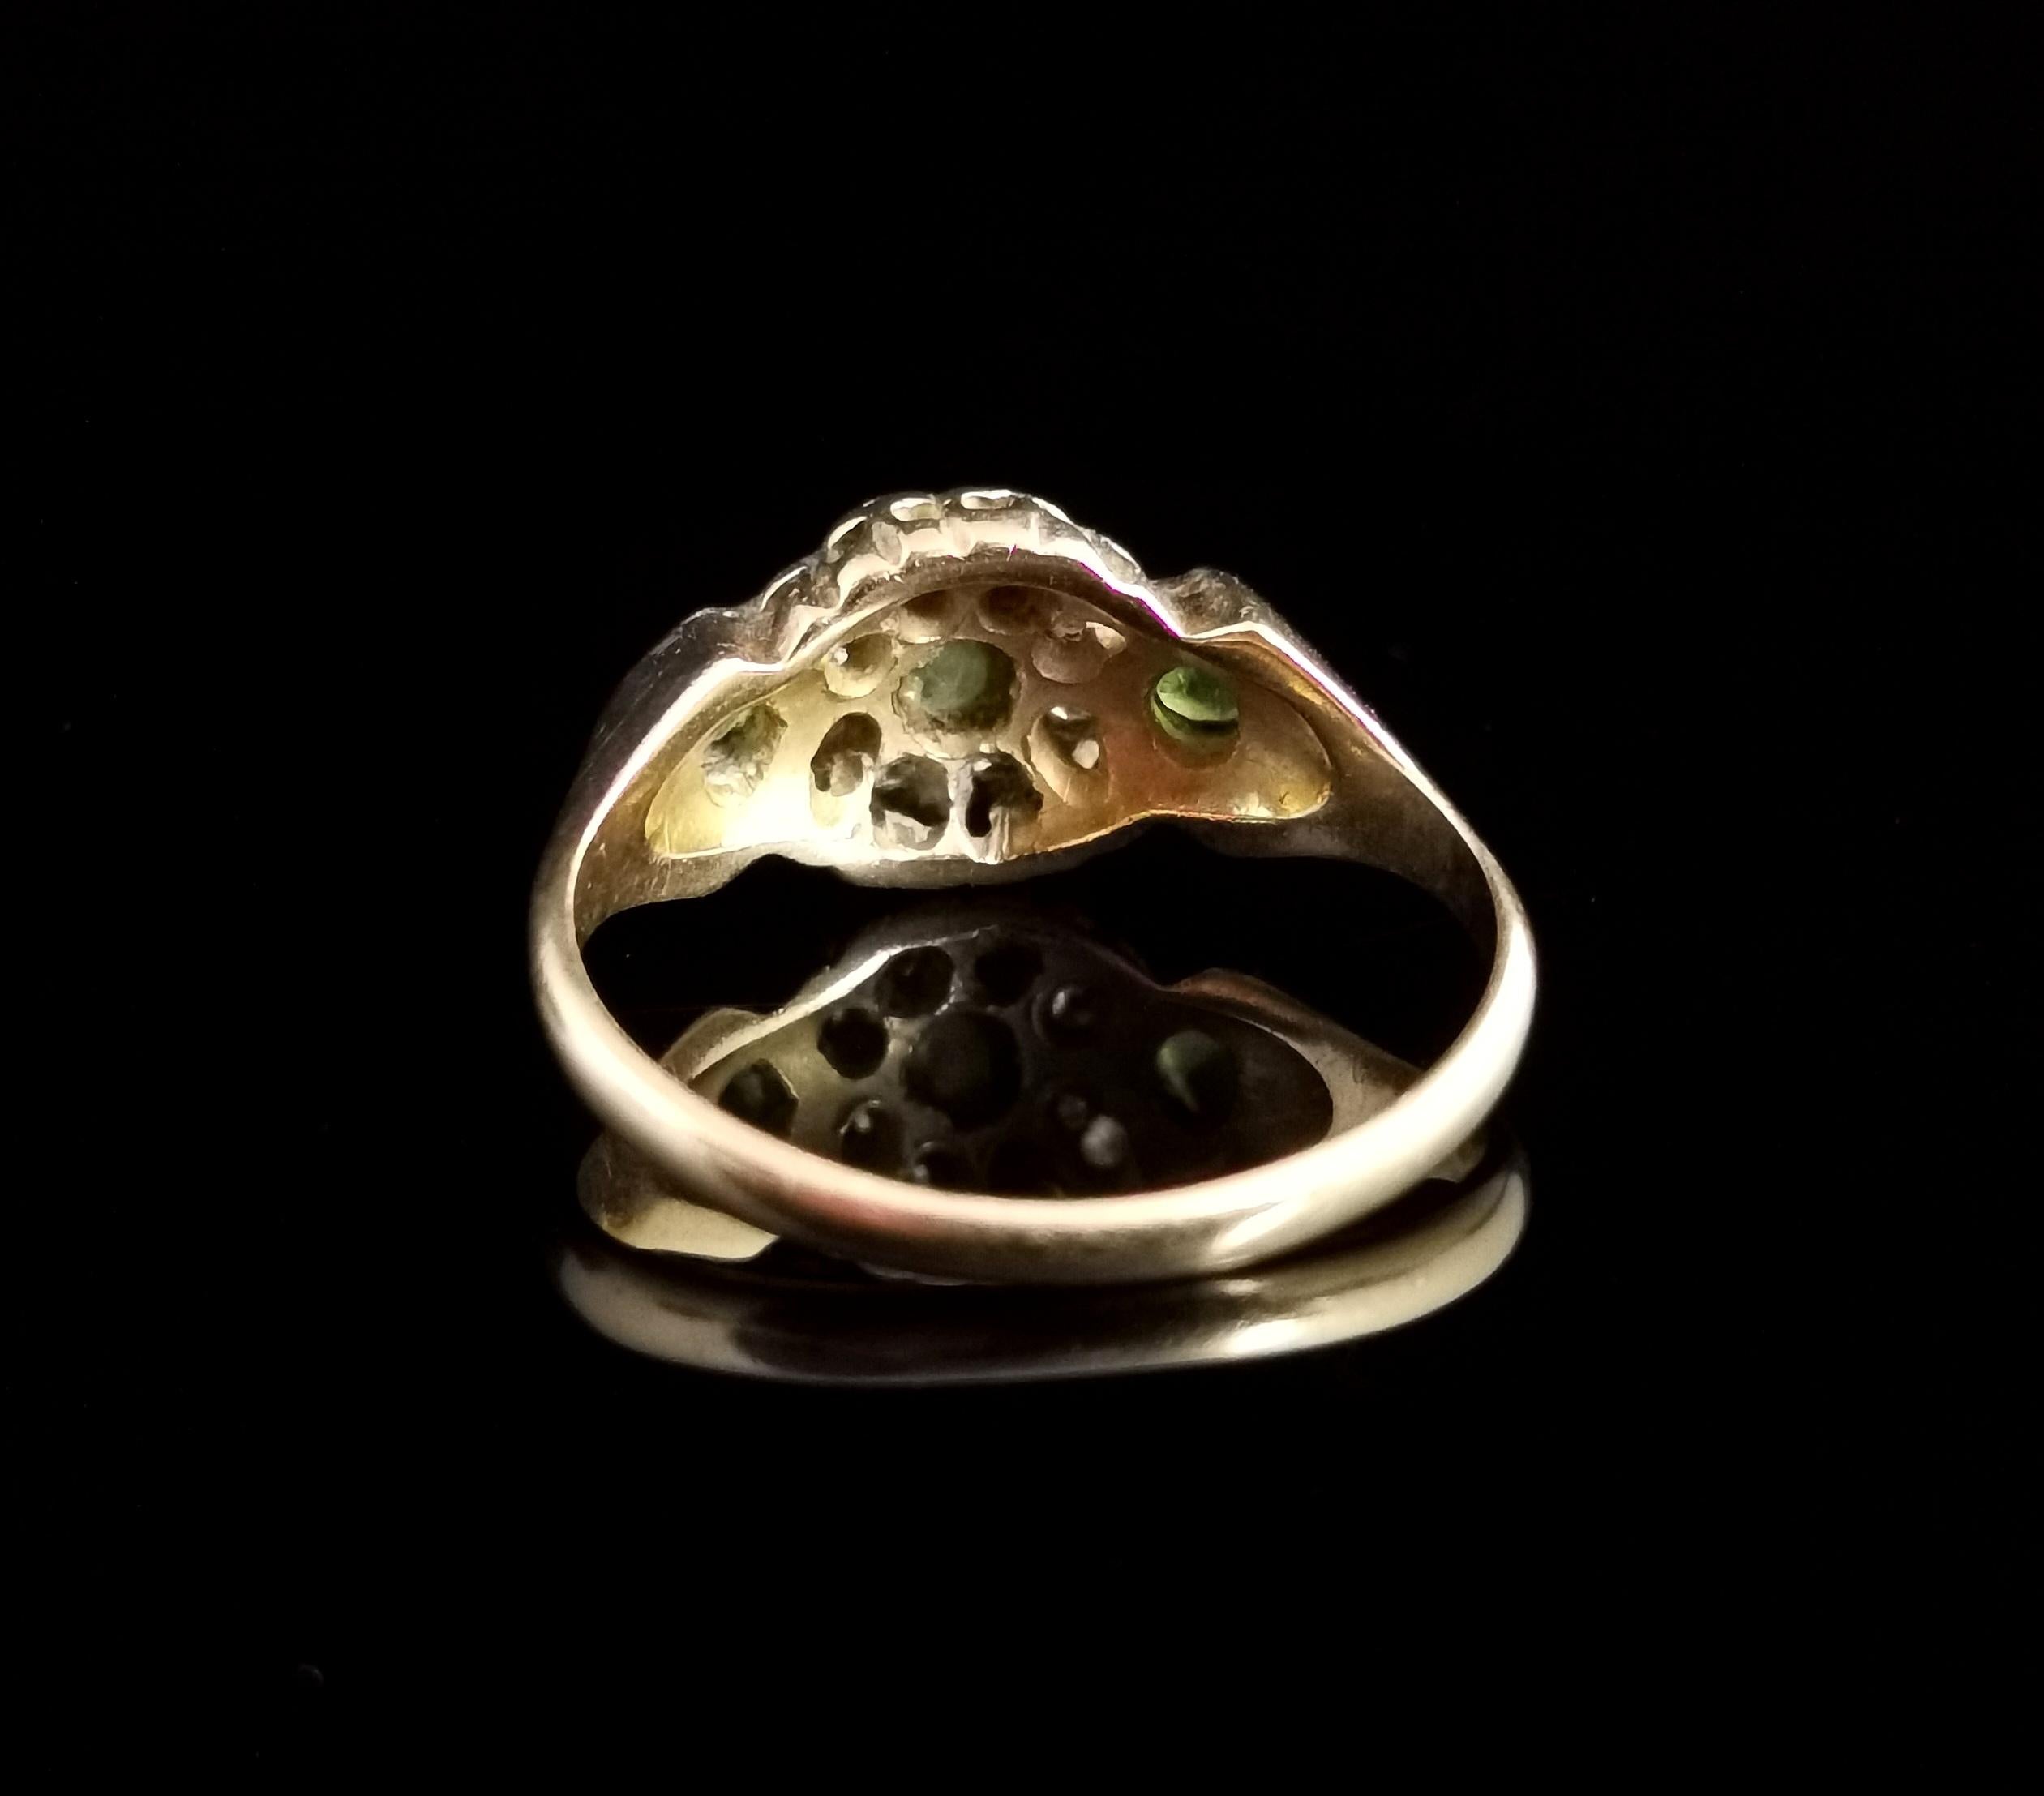 Antique Edwardian Peridot and Diamond Cluster Ring, 18k Yellow Gold 1